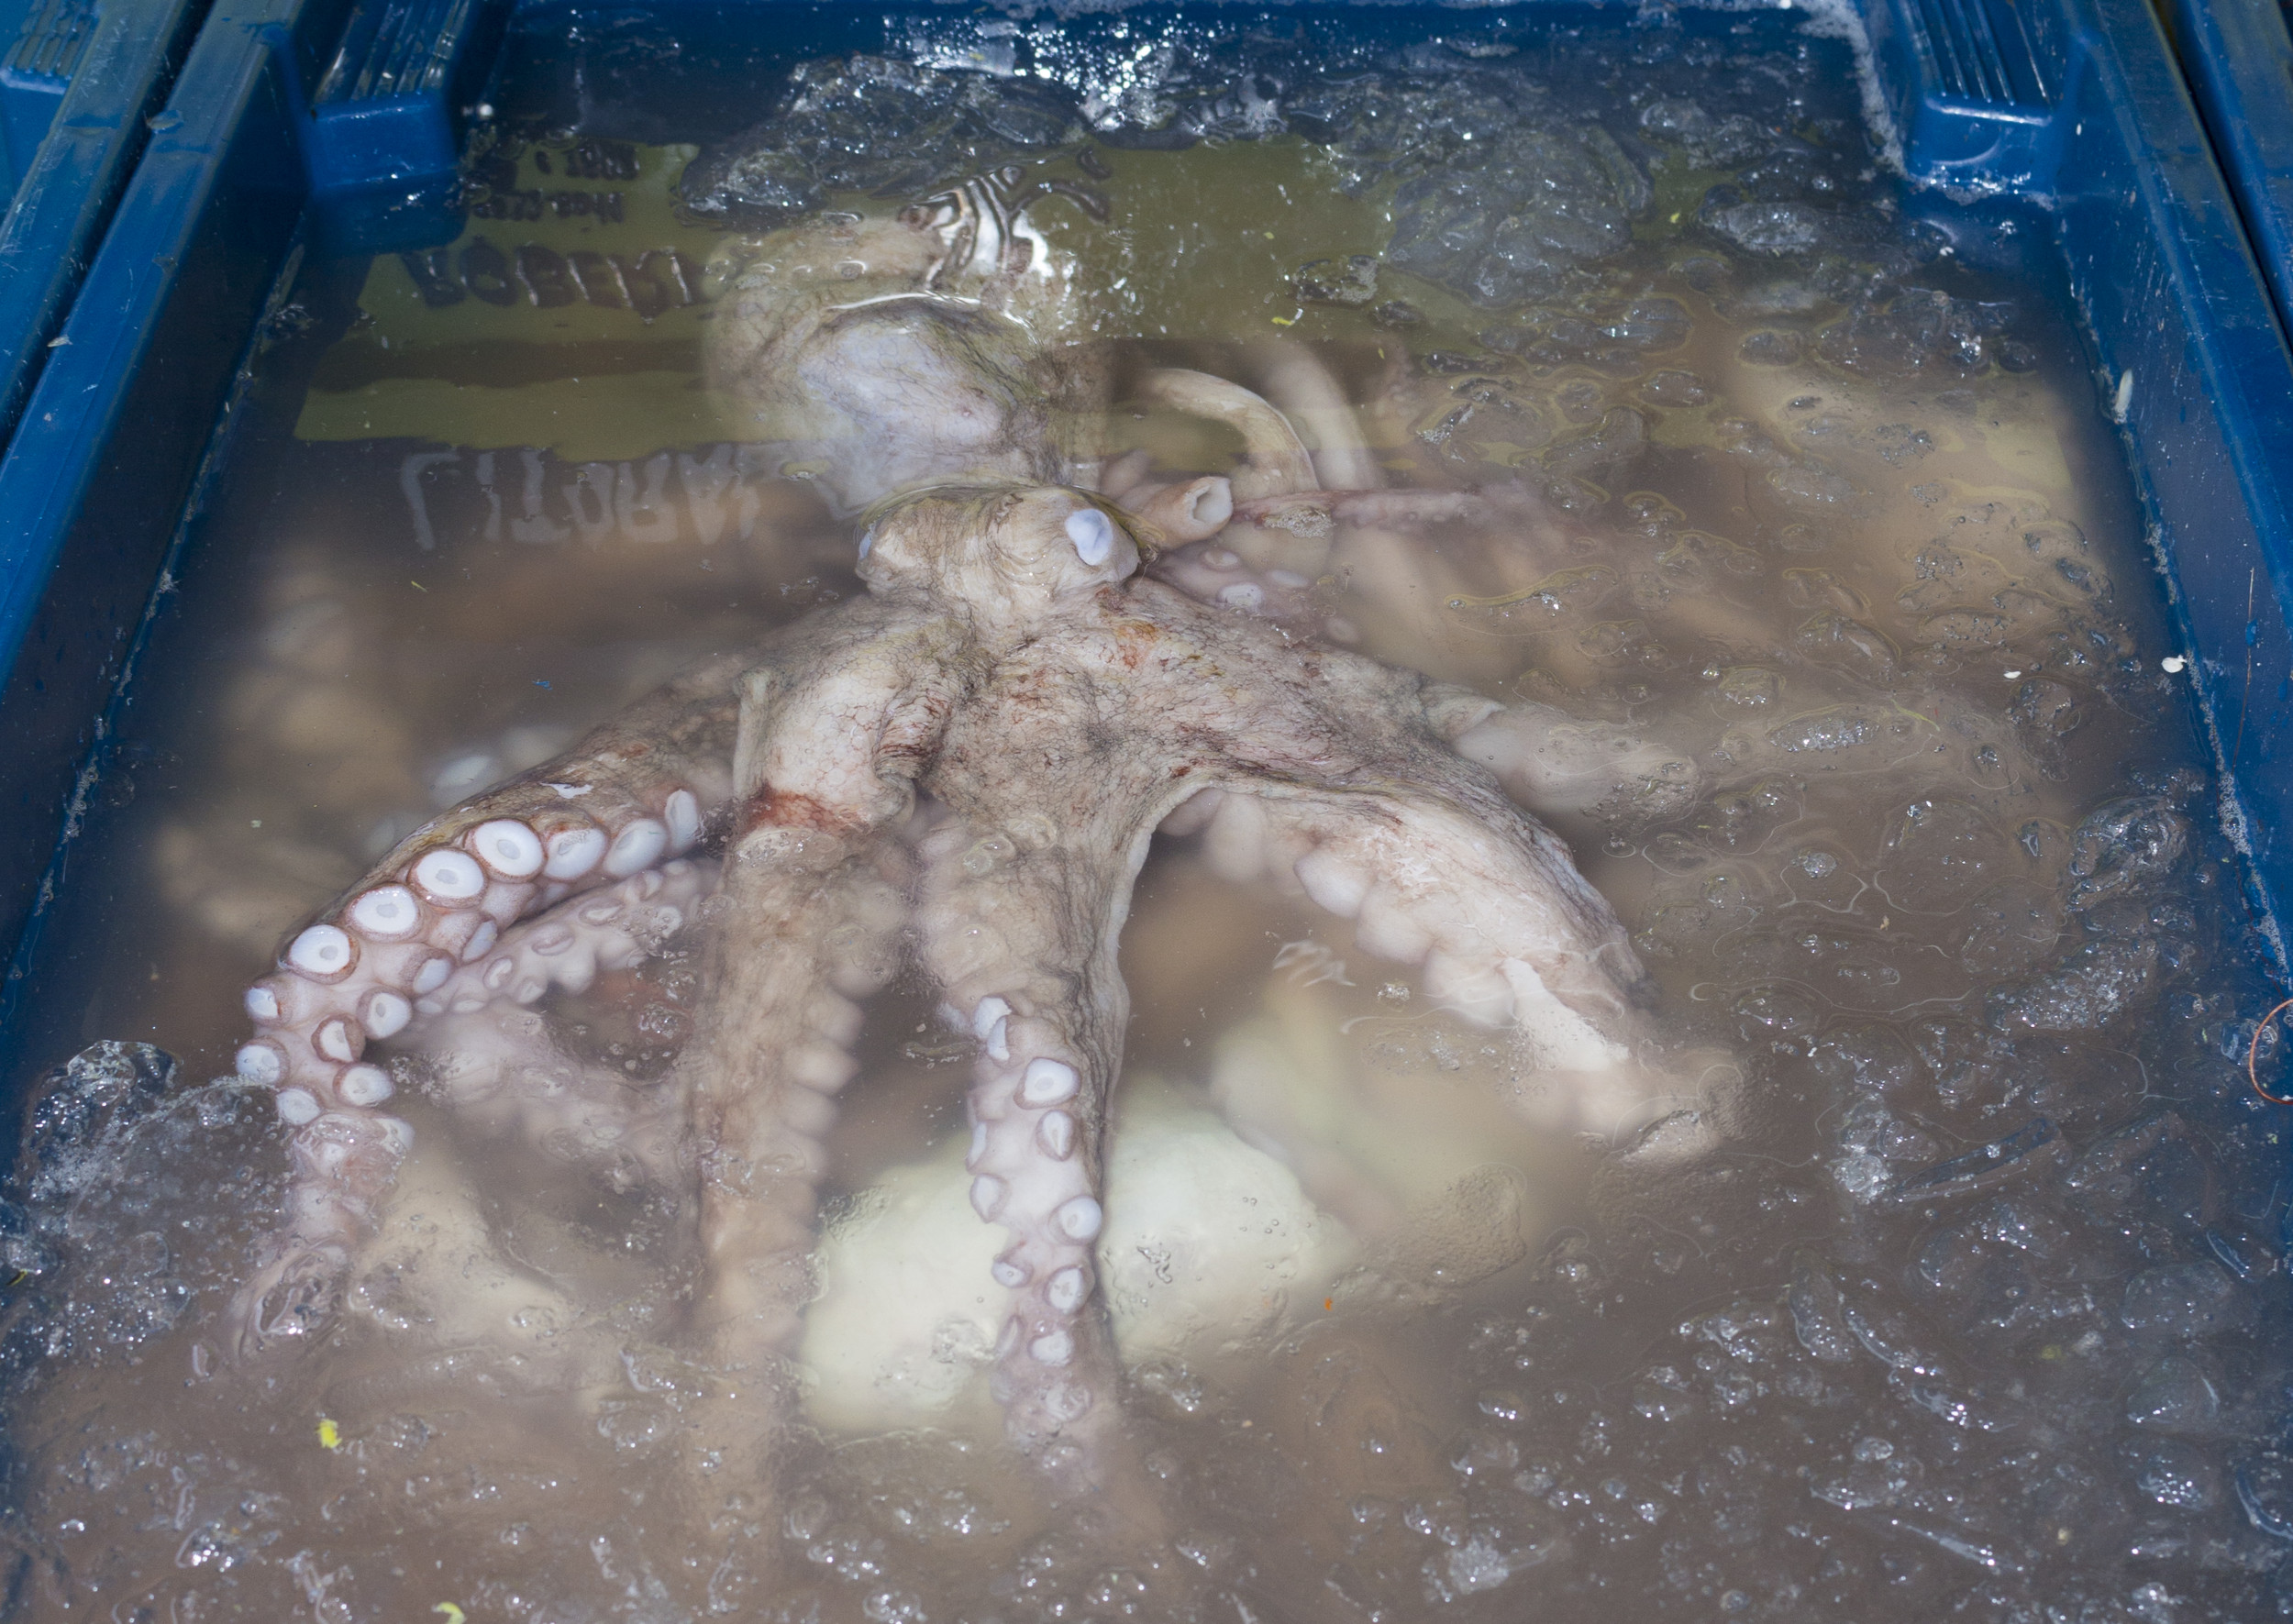 “Horrific terror and pain”: Warning octopus farm will lead to cannibalism